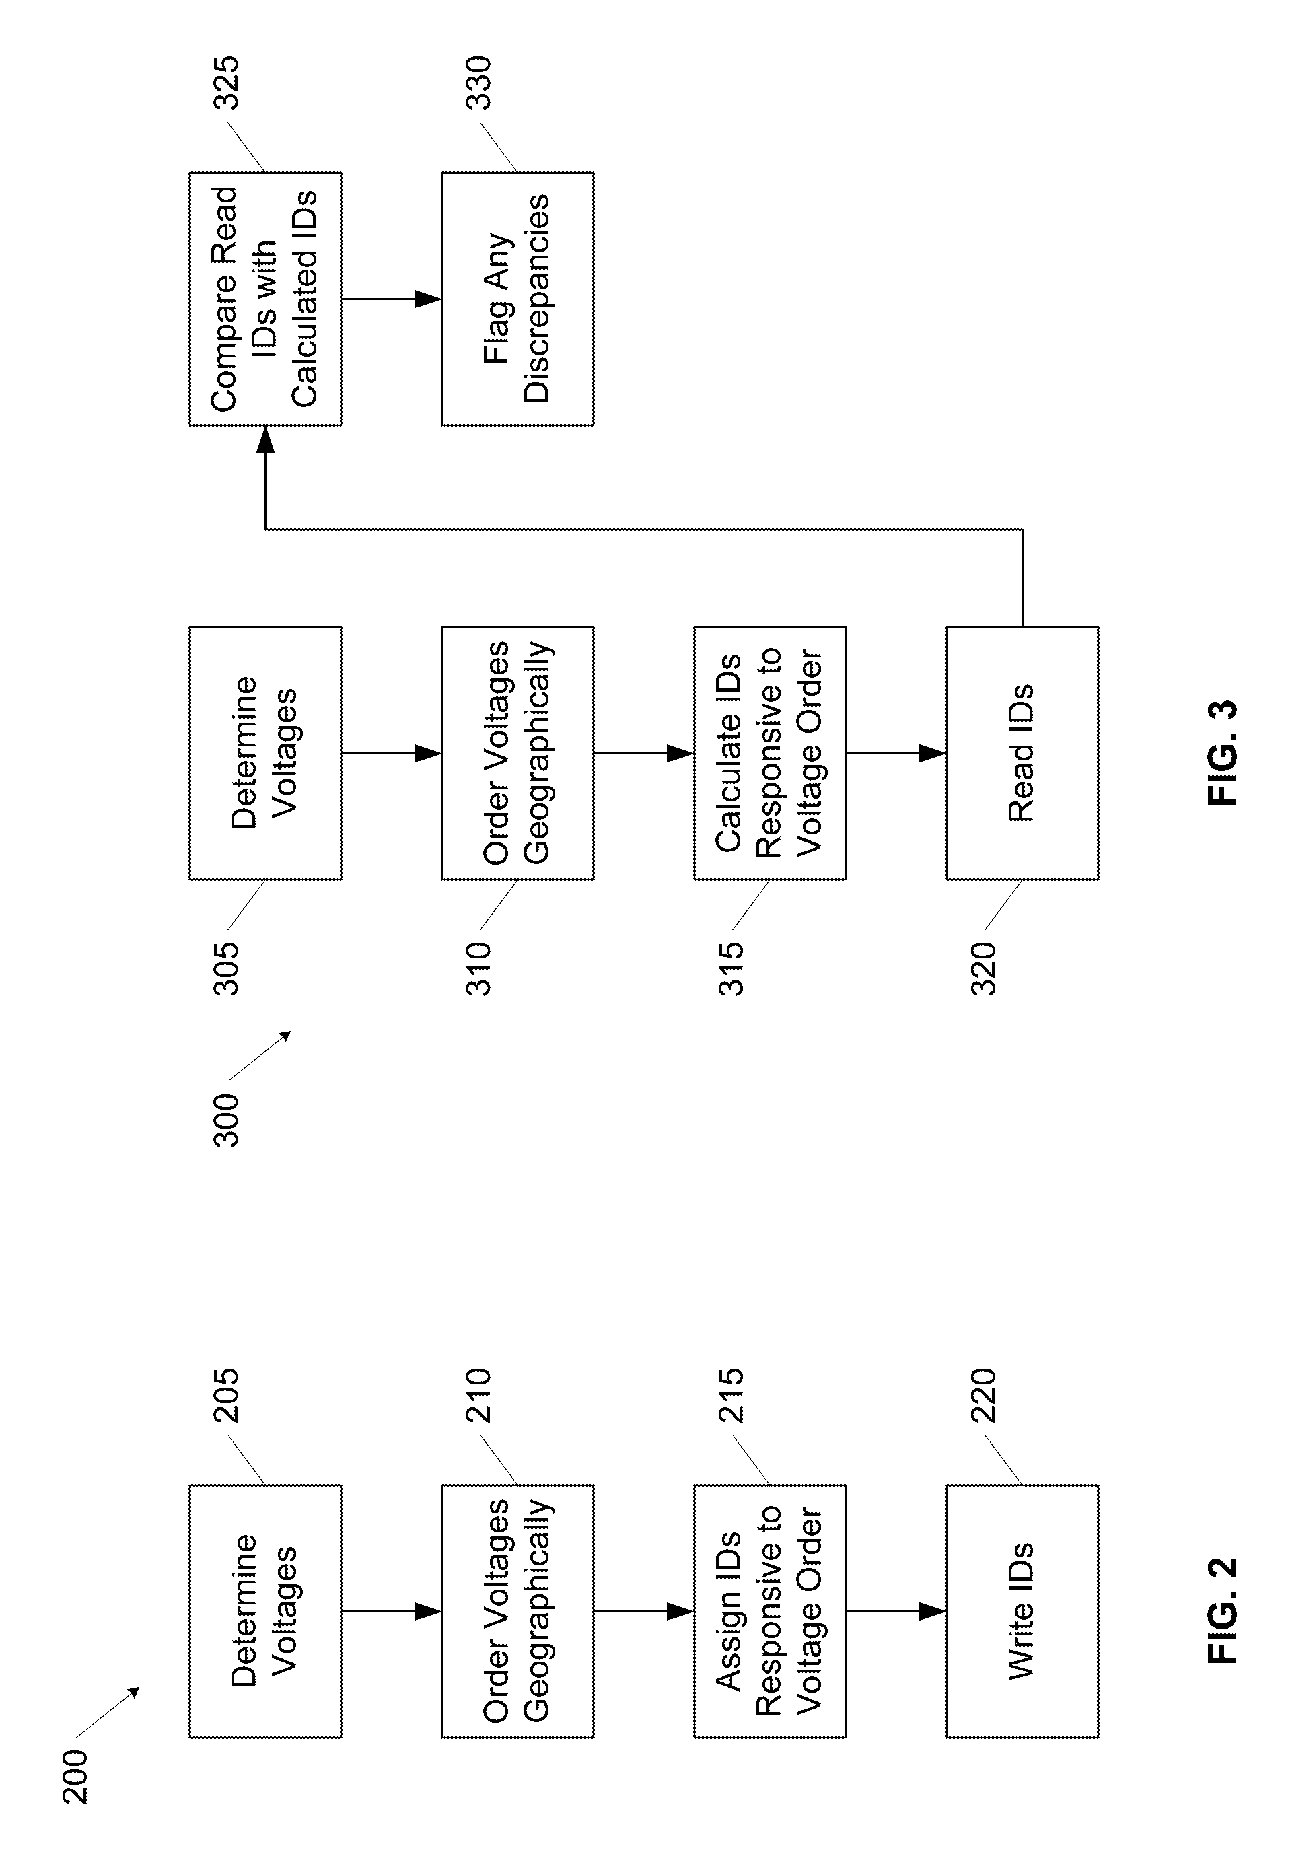 Common mode voltage enumeration in a battery pack